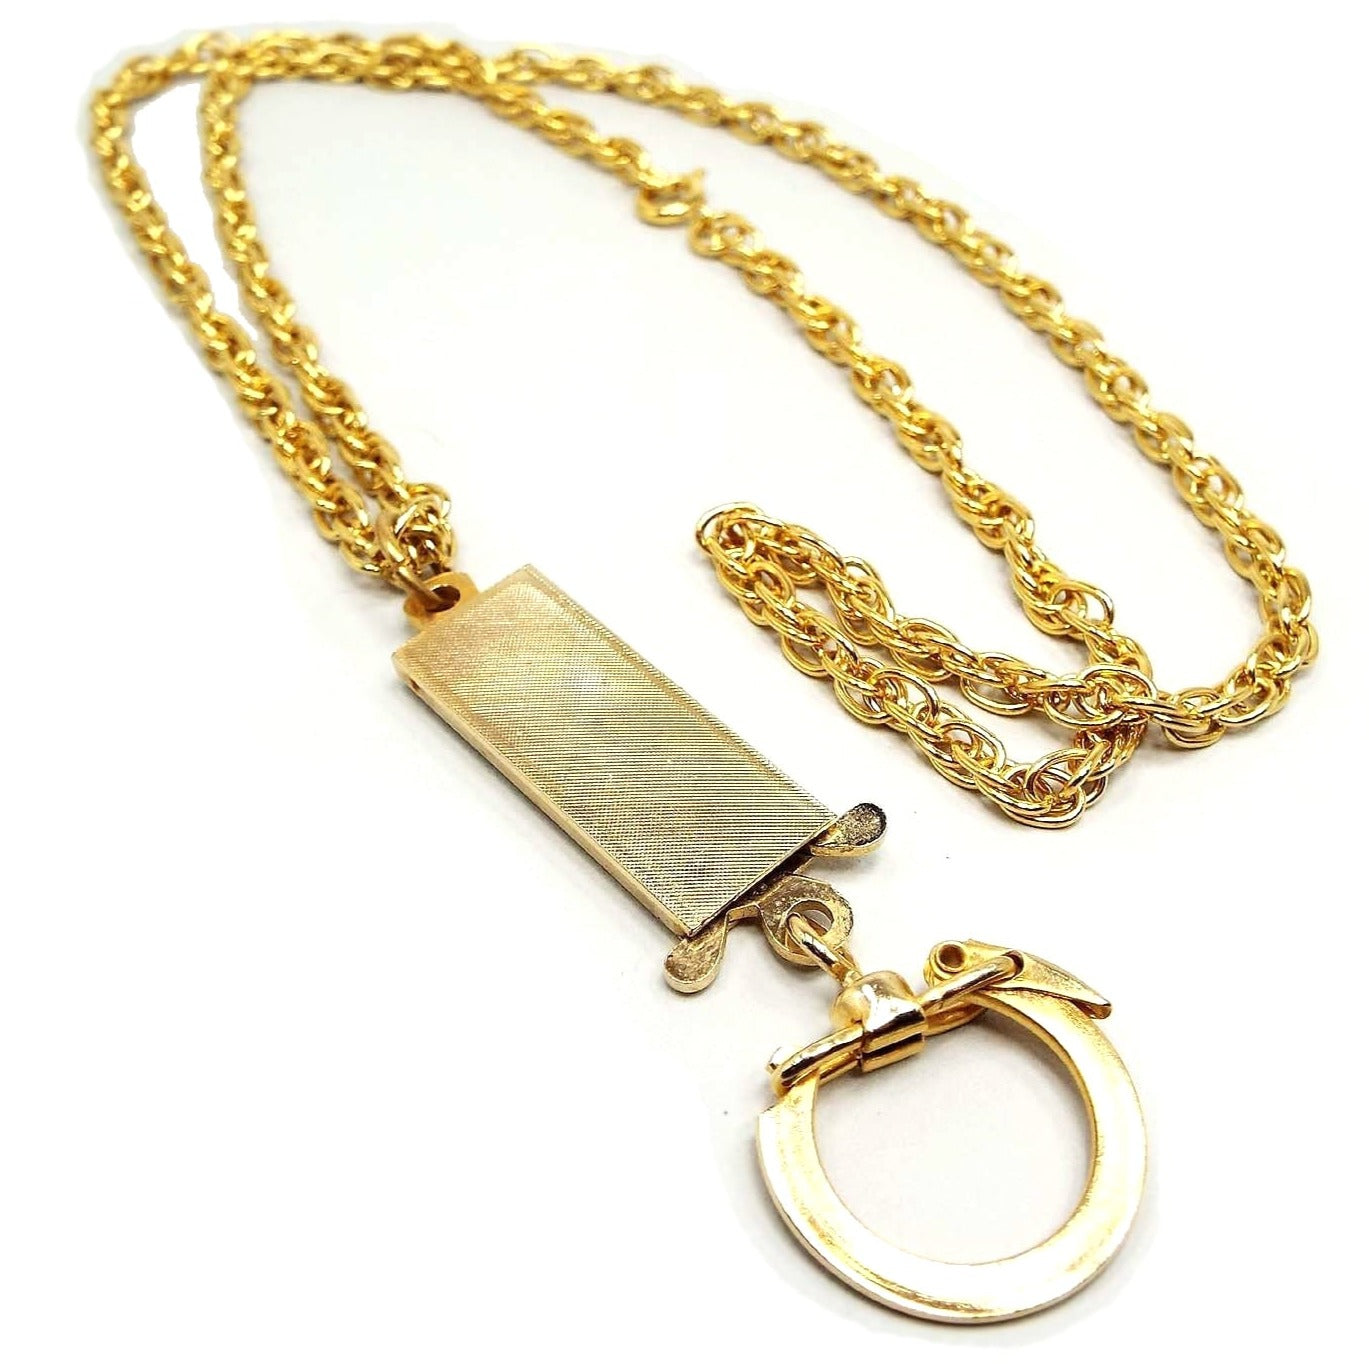 Front view of the retro vintage keychain lanyard. It has a gold tone plated rope chain with a spring ring clasp. At the bottom is a rectangular area that is textured and has a pinch style box clasp at the bottom. You can pinch the tabs together to remove the clasp holding the keychain part from the lanyard. There is a snap over style keychain ring at the very bottom.